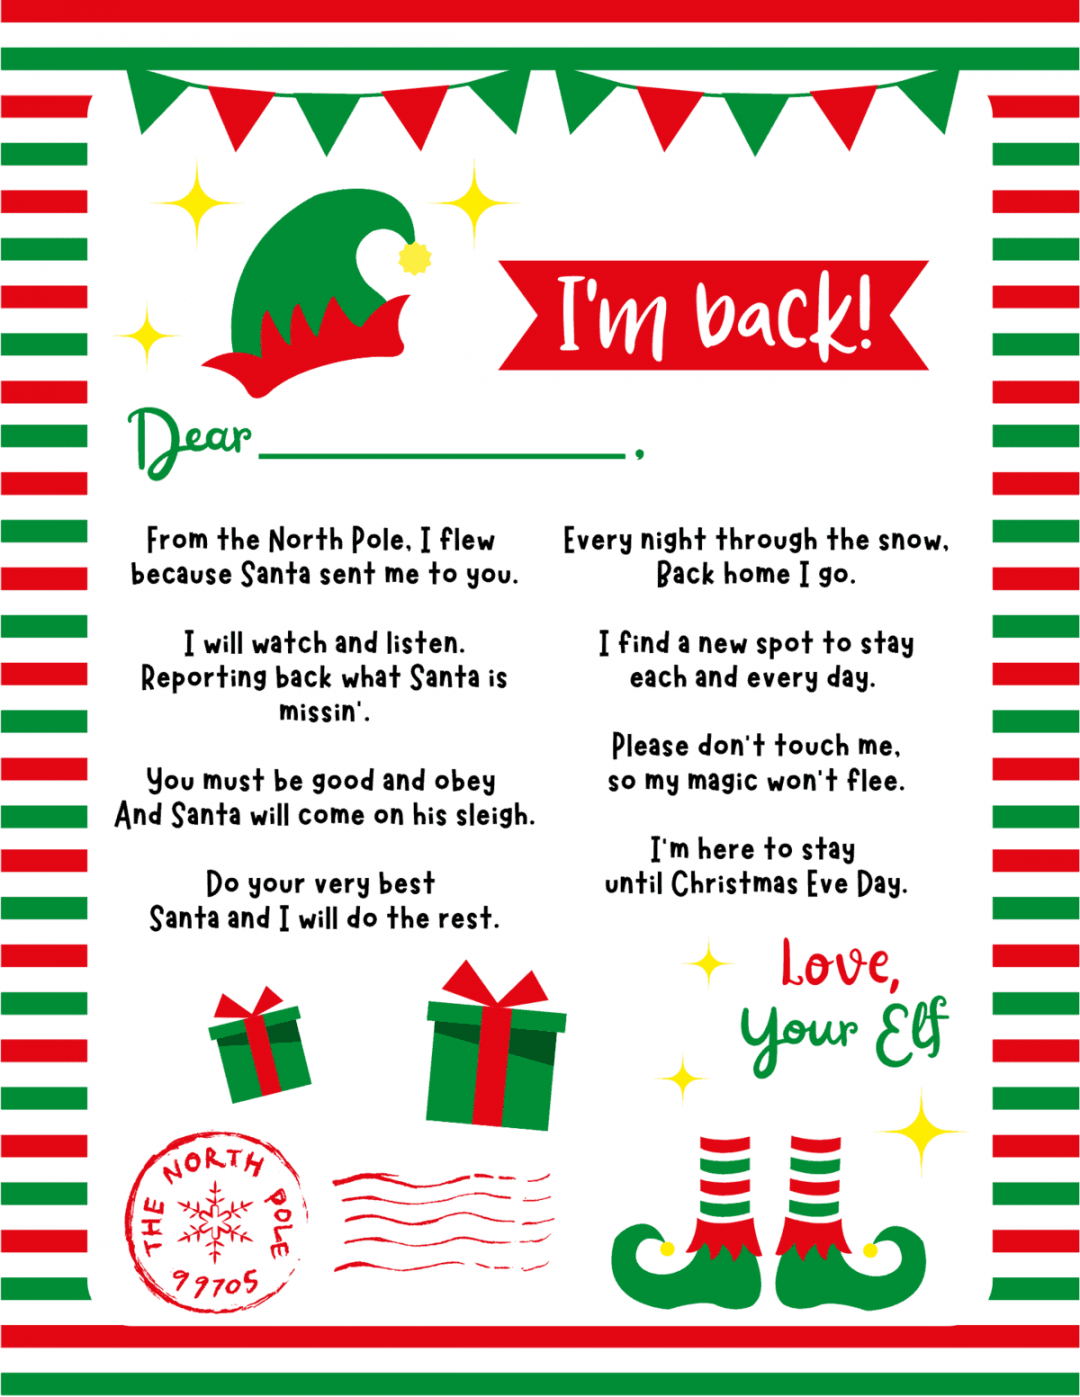 Free Printable Elf On The Shelf Arrival Letter - Printable - Free Printable Elf on the Shelf Arrival Letter - Prudent Penny Pincher